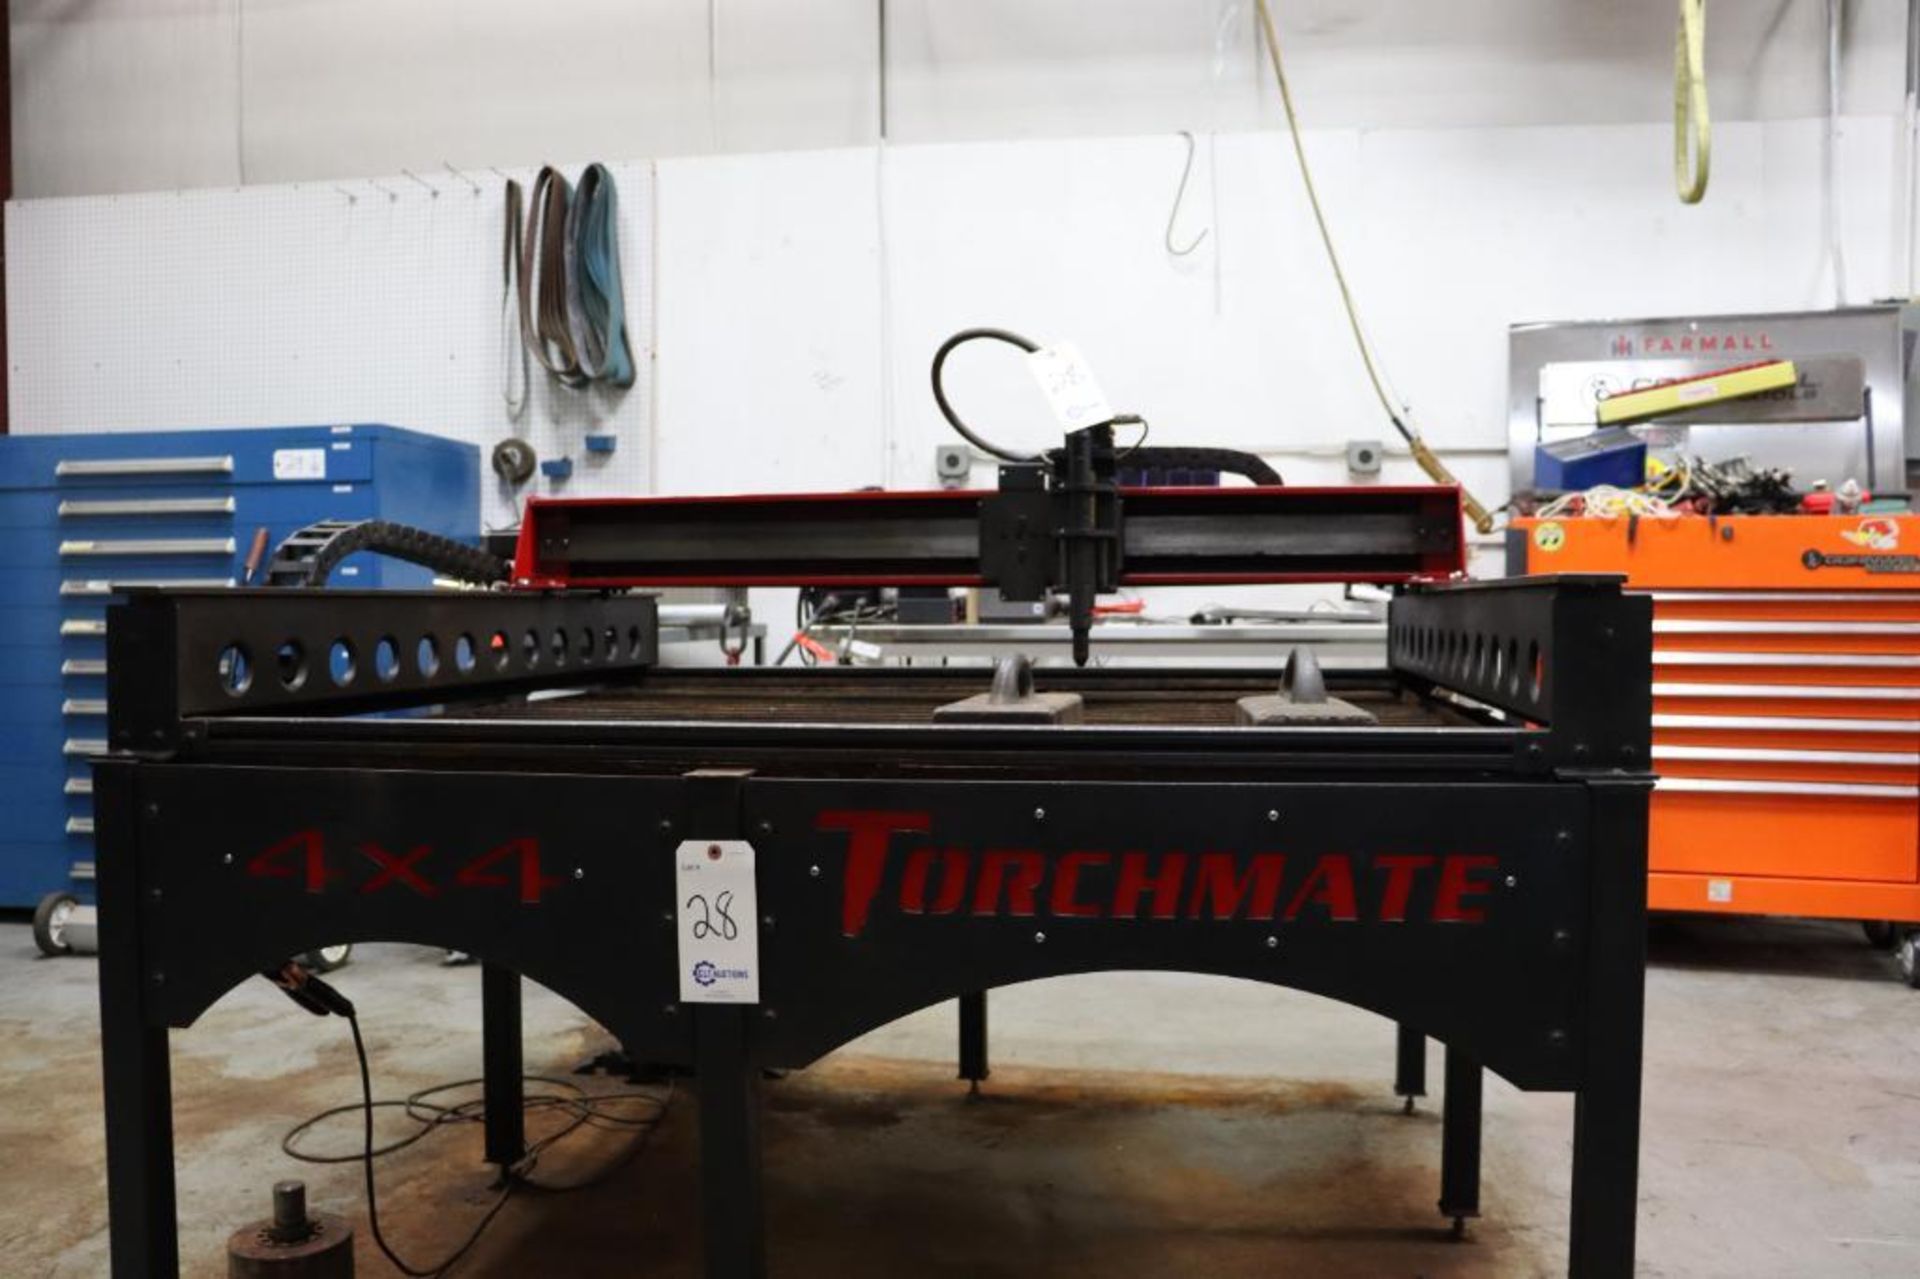 Torchmate 4 x 4 plasma table w/ Hypertherm 45 - Image 19 of 19